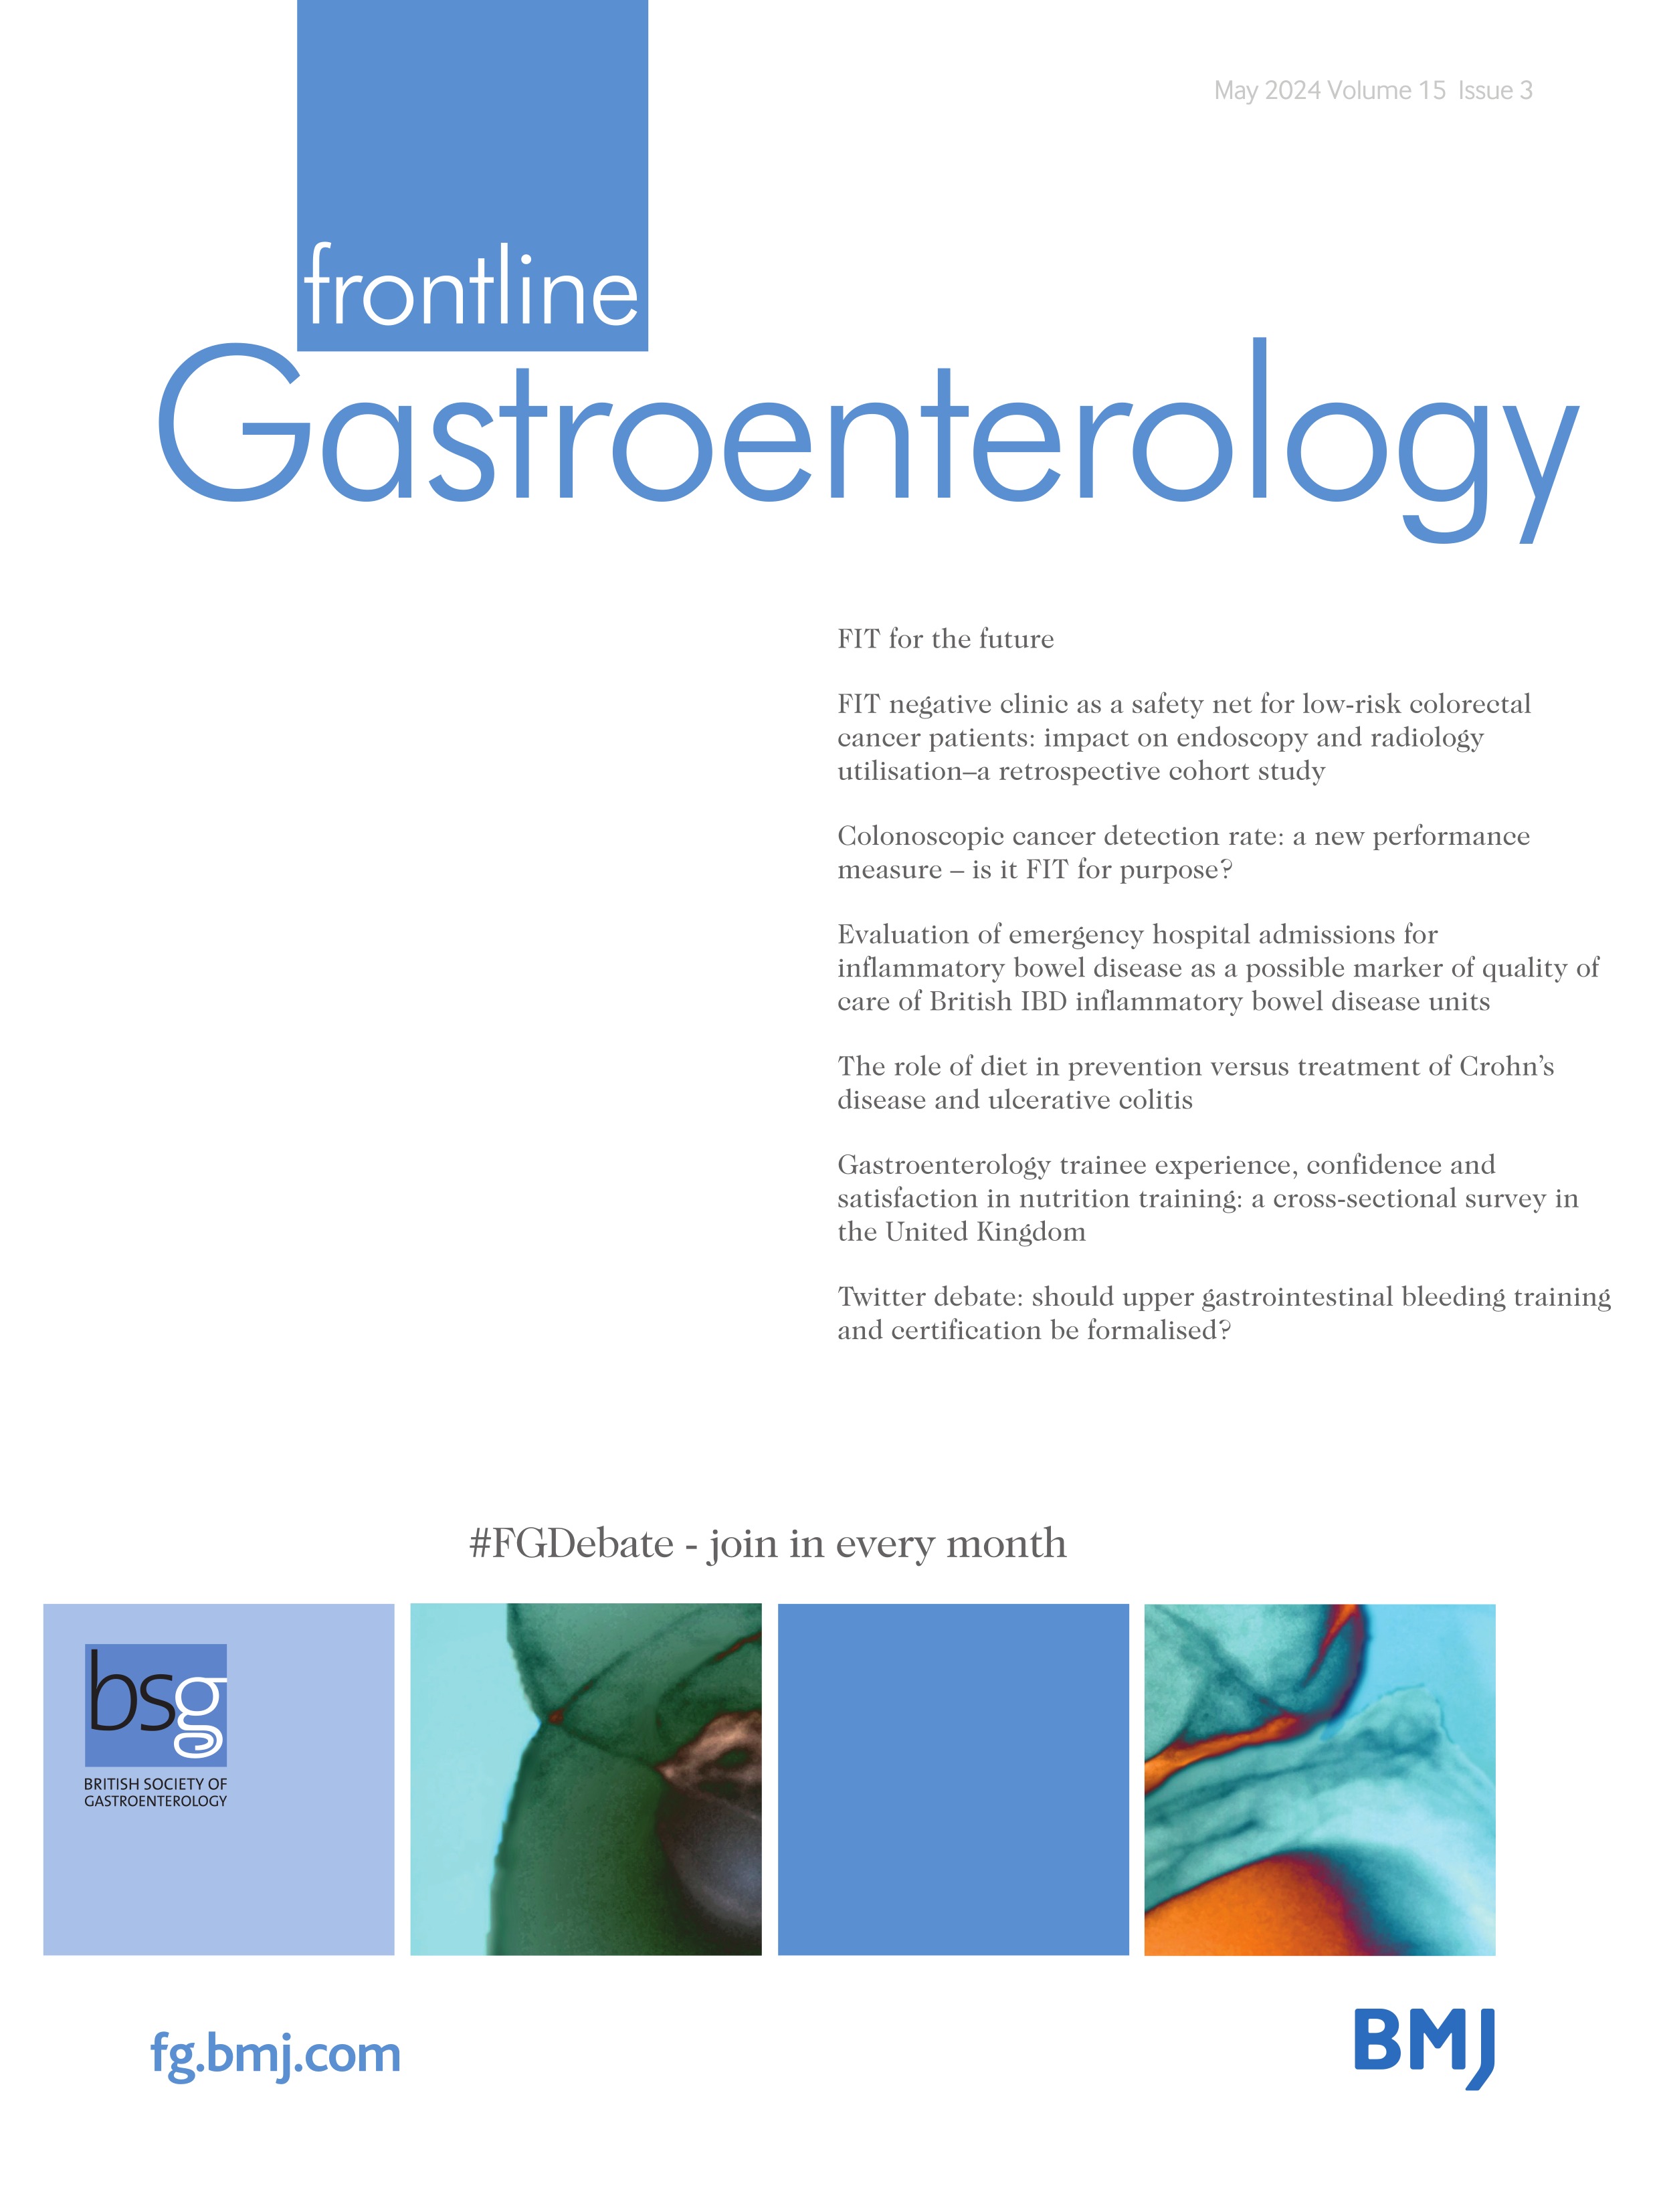 Gastroenterology trainee experience, confidence and satisfaction in nutrition training: a cross-sectional survey in the UK